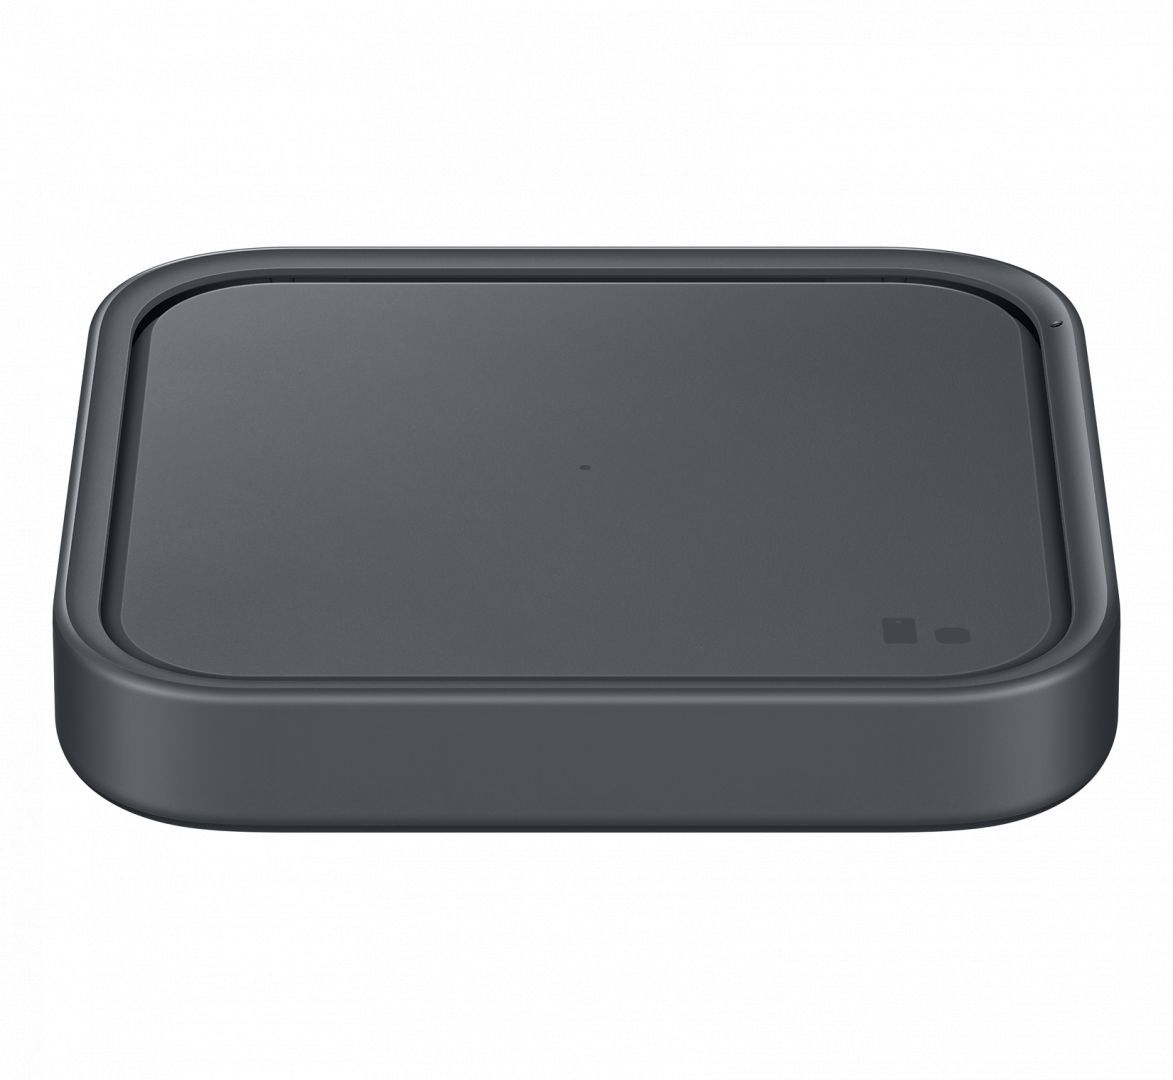 Samsung Super Fast Wireless Charger Black